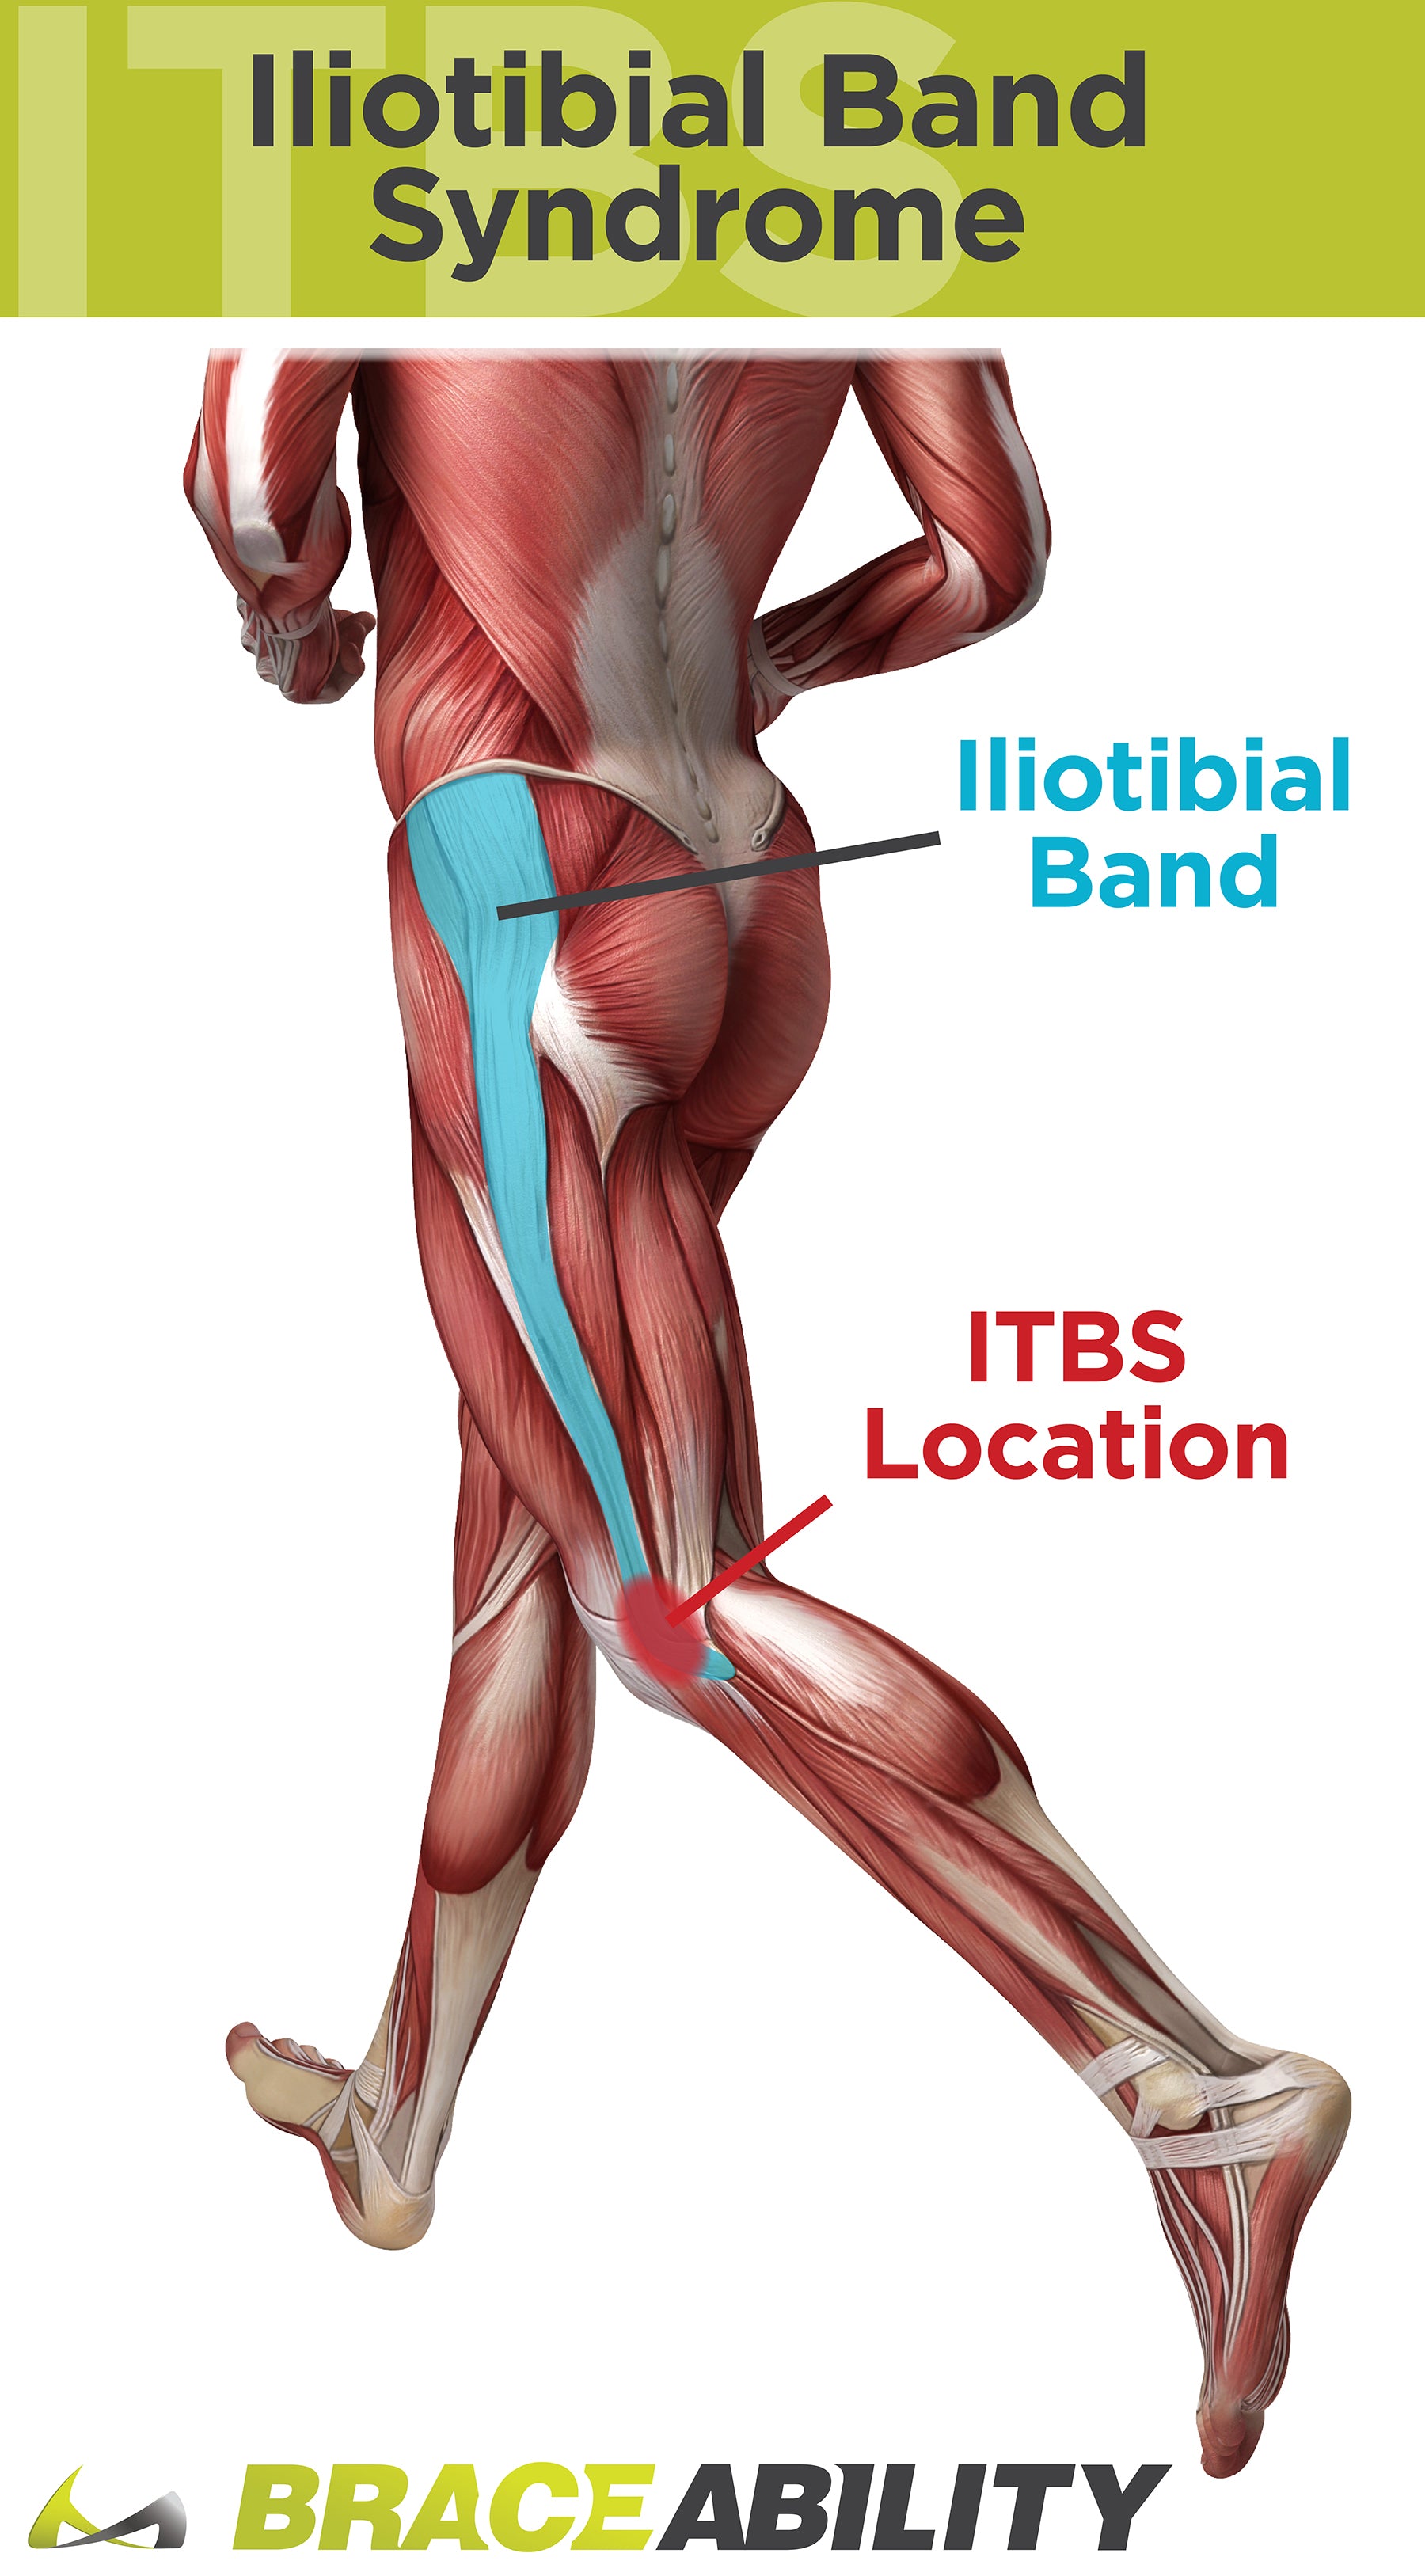 IT band syndrome is a leading cause of knee pain through the iliotibial band syndrome